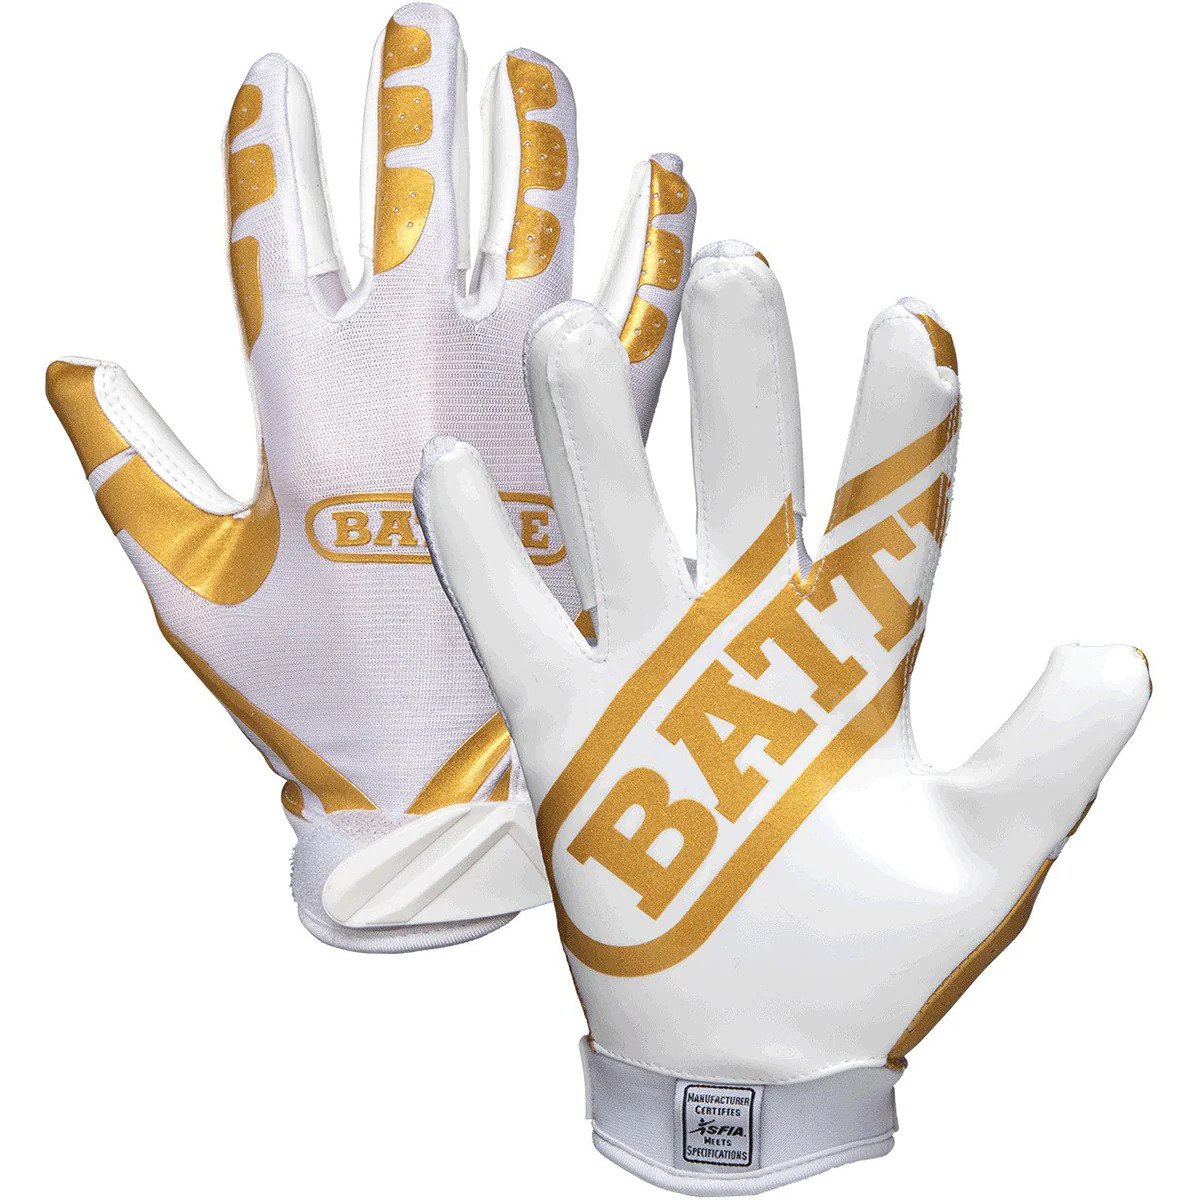 From Fingers to Field: Picking the Perfect Battle Gloves